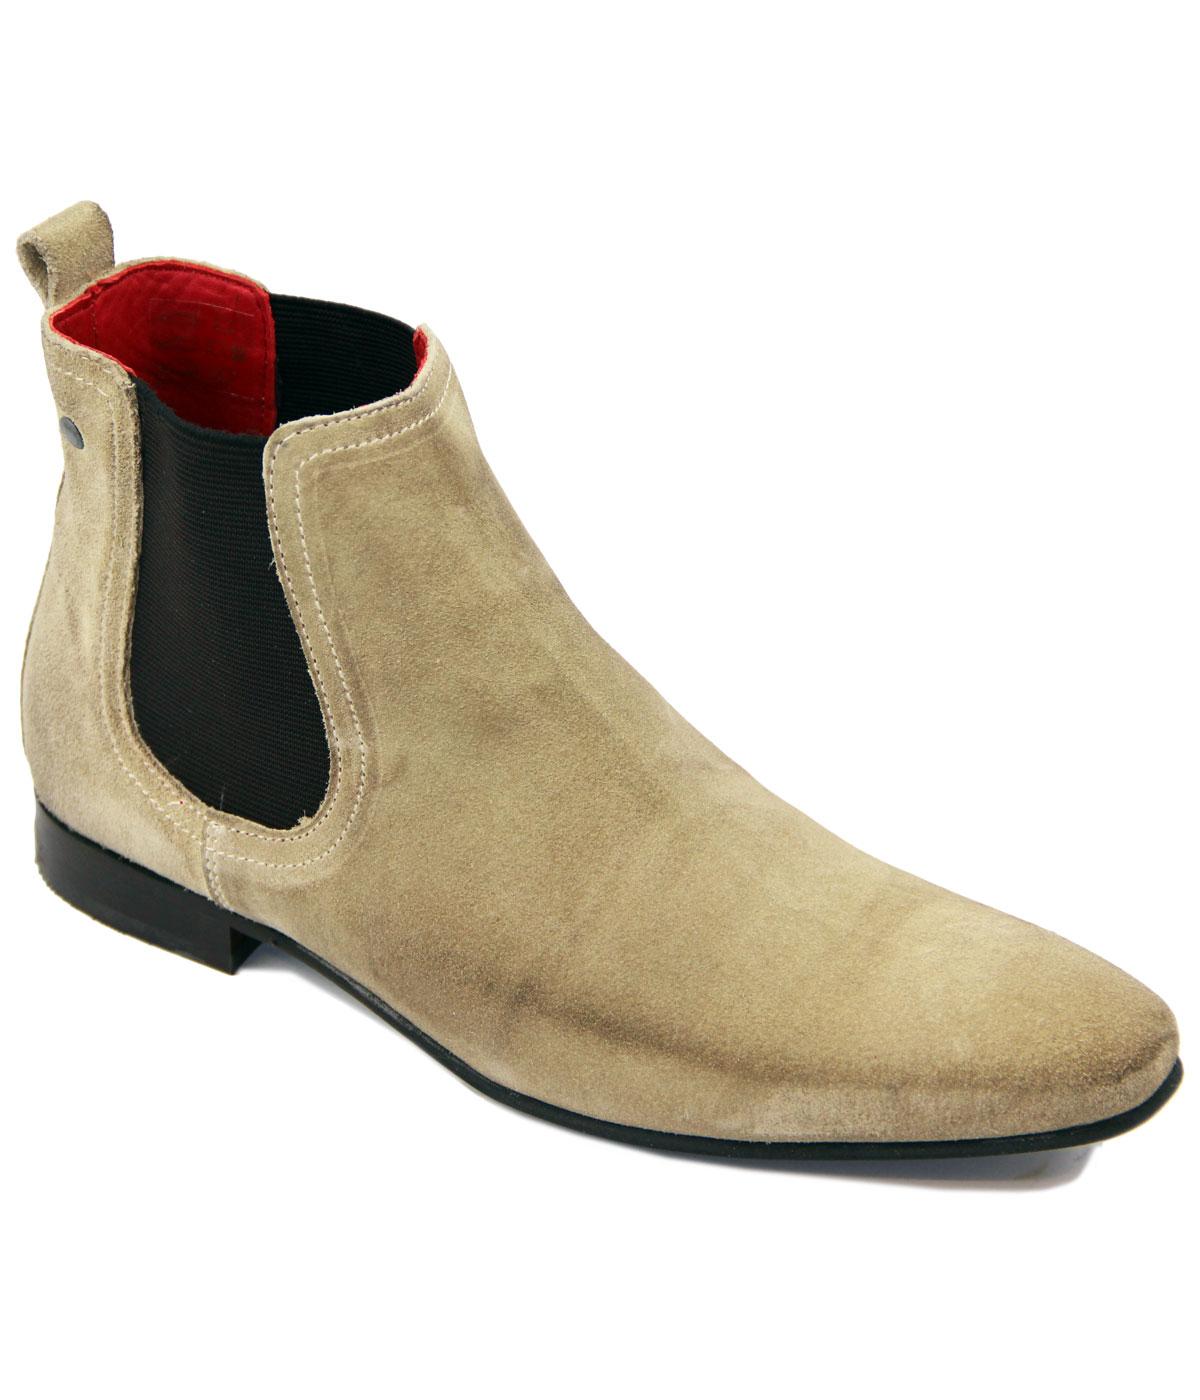 Thread BASE LONDON Mod Greasy Suede Chelsea Boots